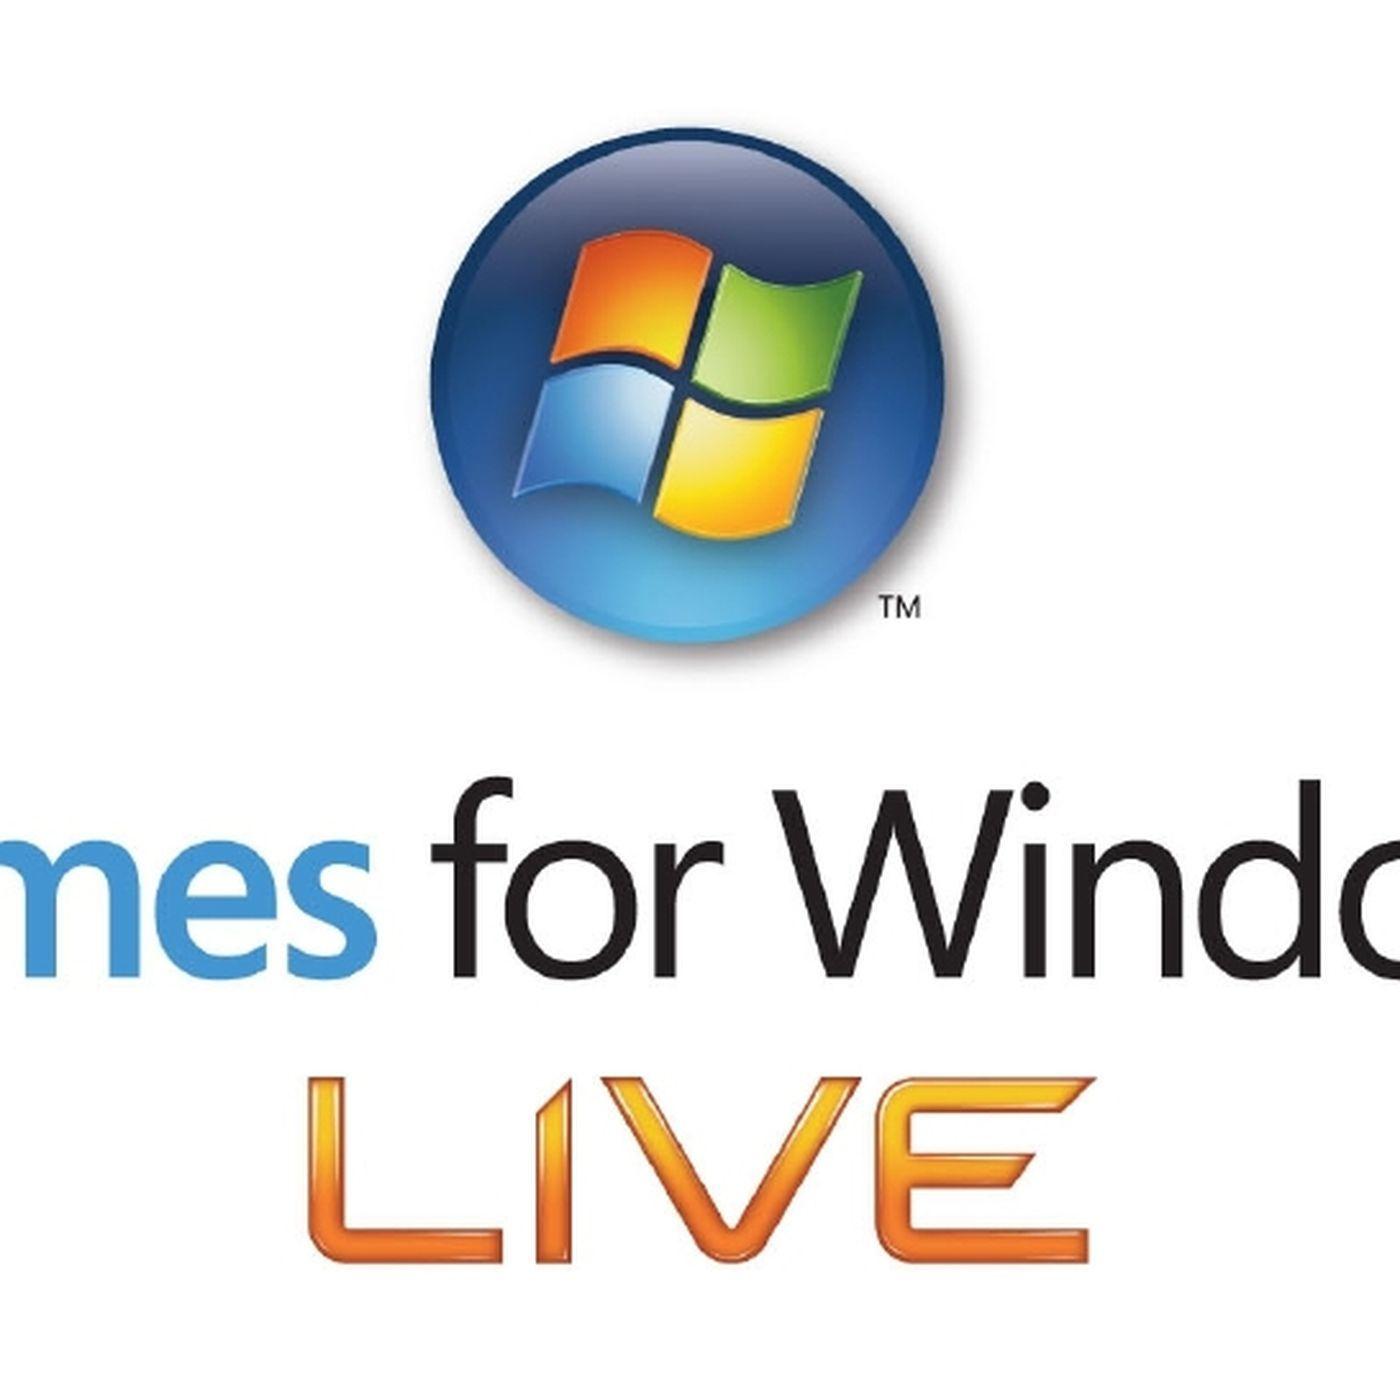 Games for Windows Live Logo - Microsoft says it isn't shutting down Games for Windows Live